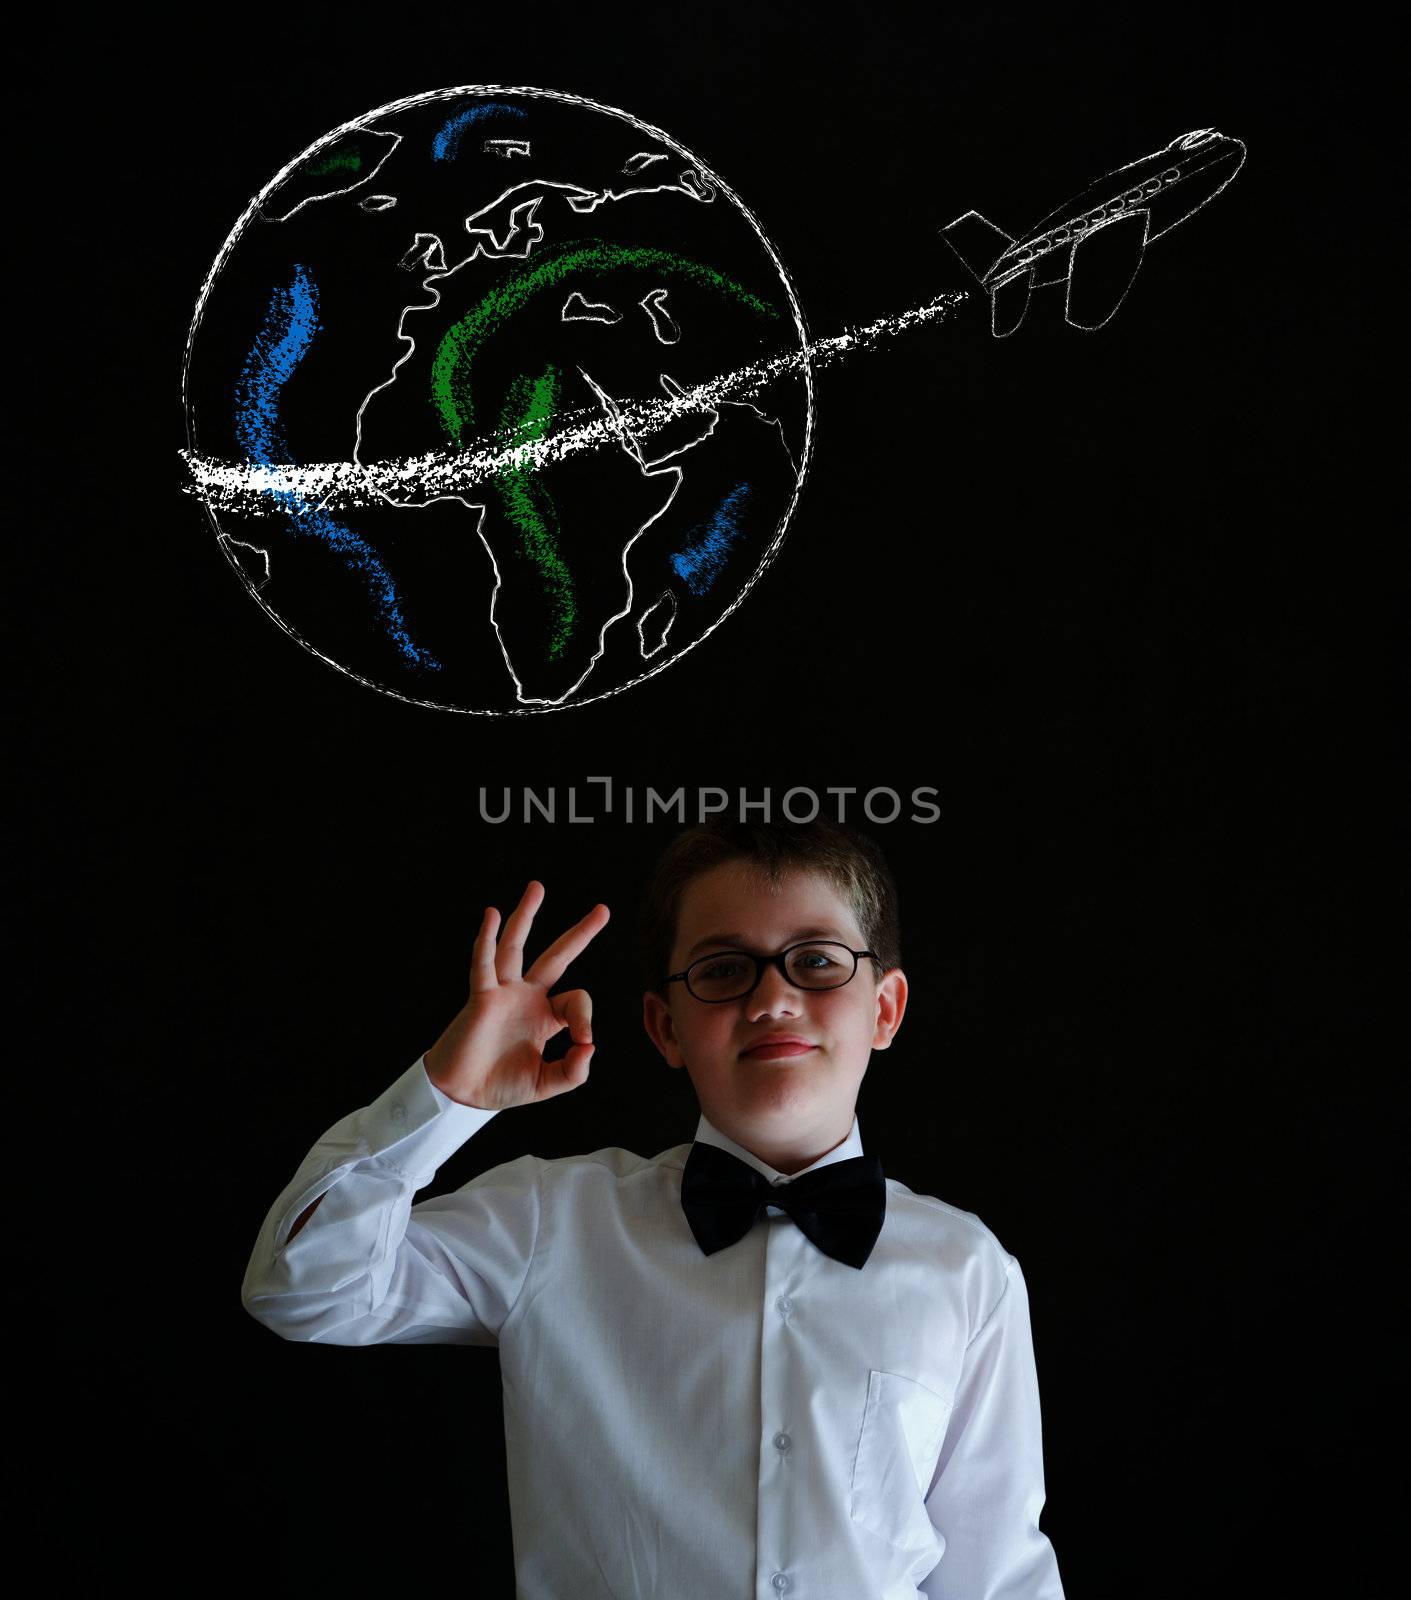 All ok or okay sign boy dressed up as business man with chalk globe and jet world travel on blackboard background